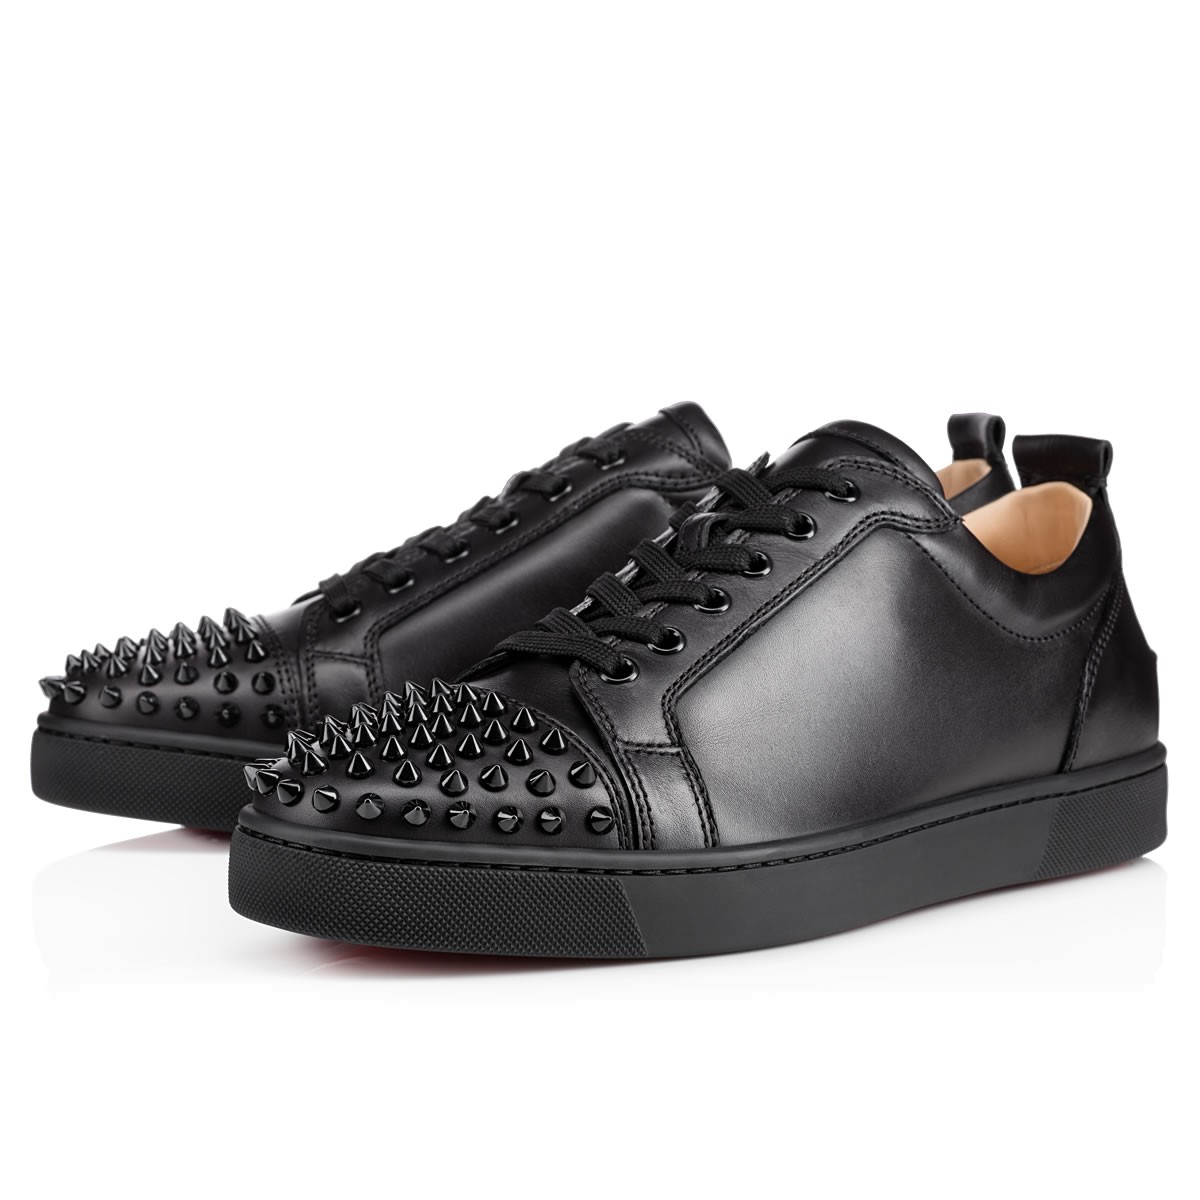 Christian Louboutin Men's Louis Spikes Flat High-Top Sneakers Studded ...